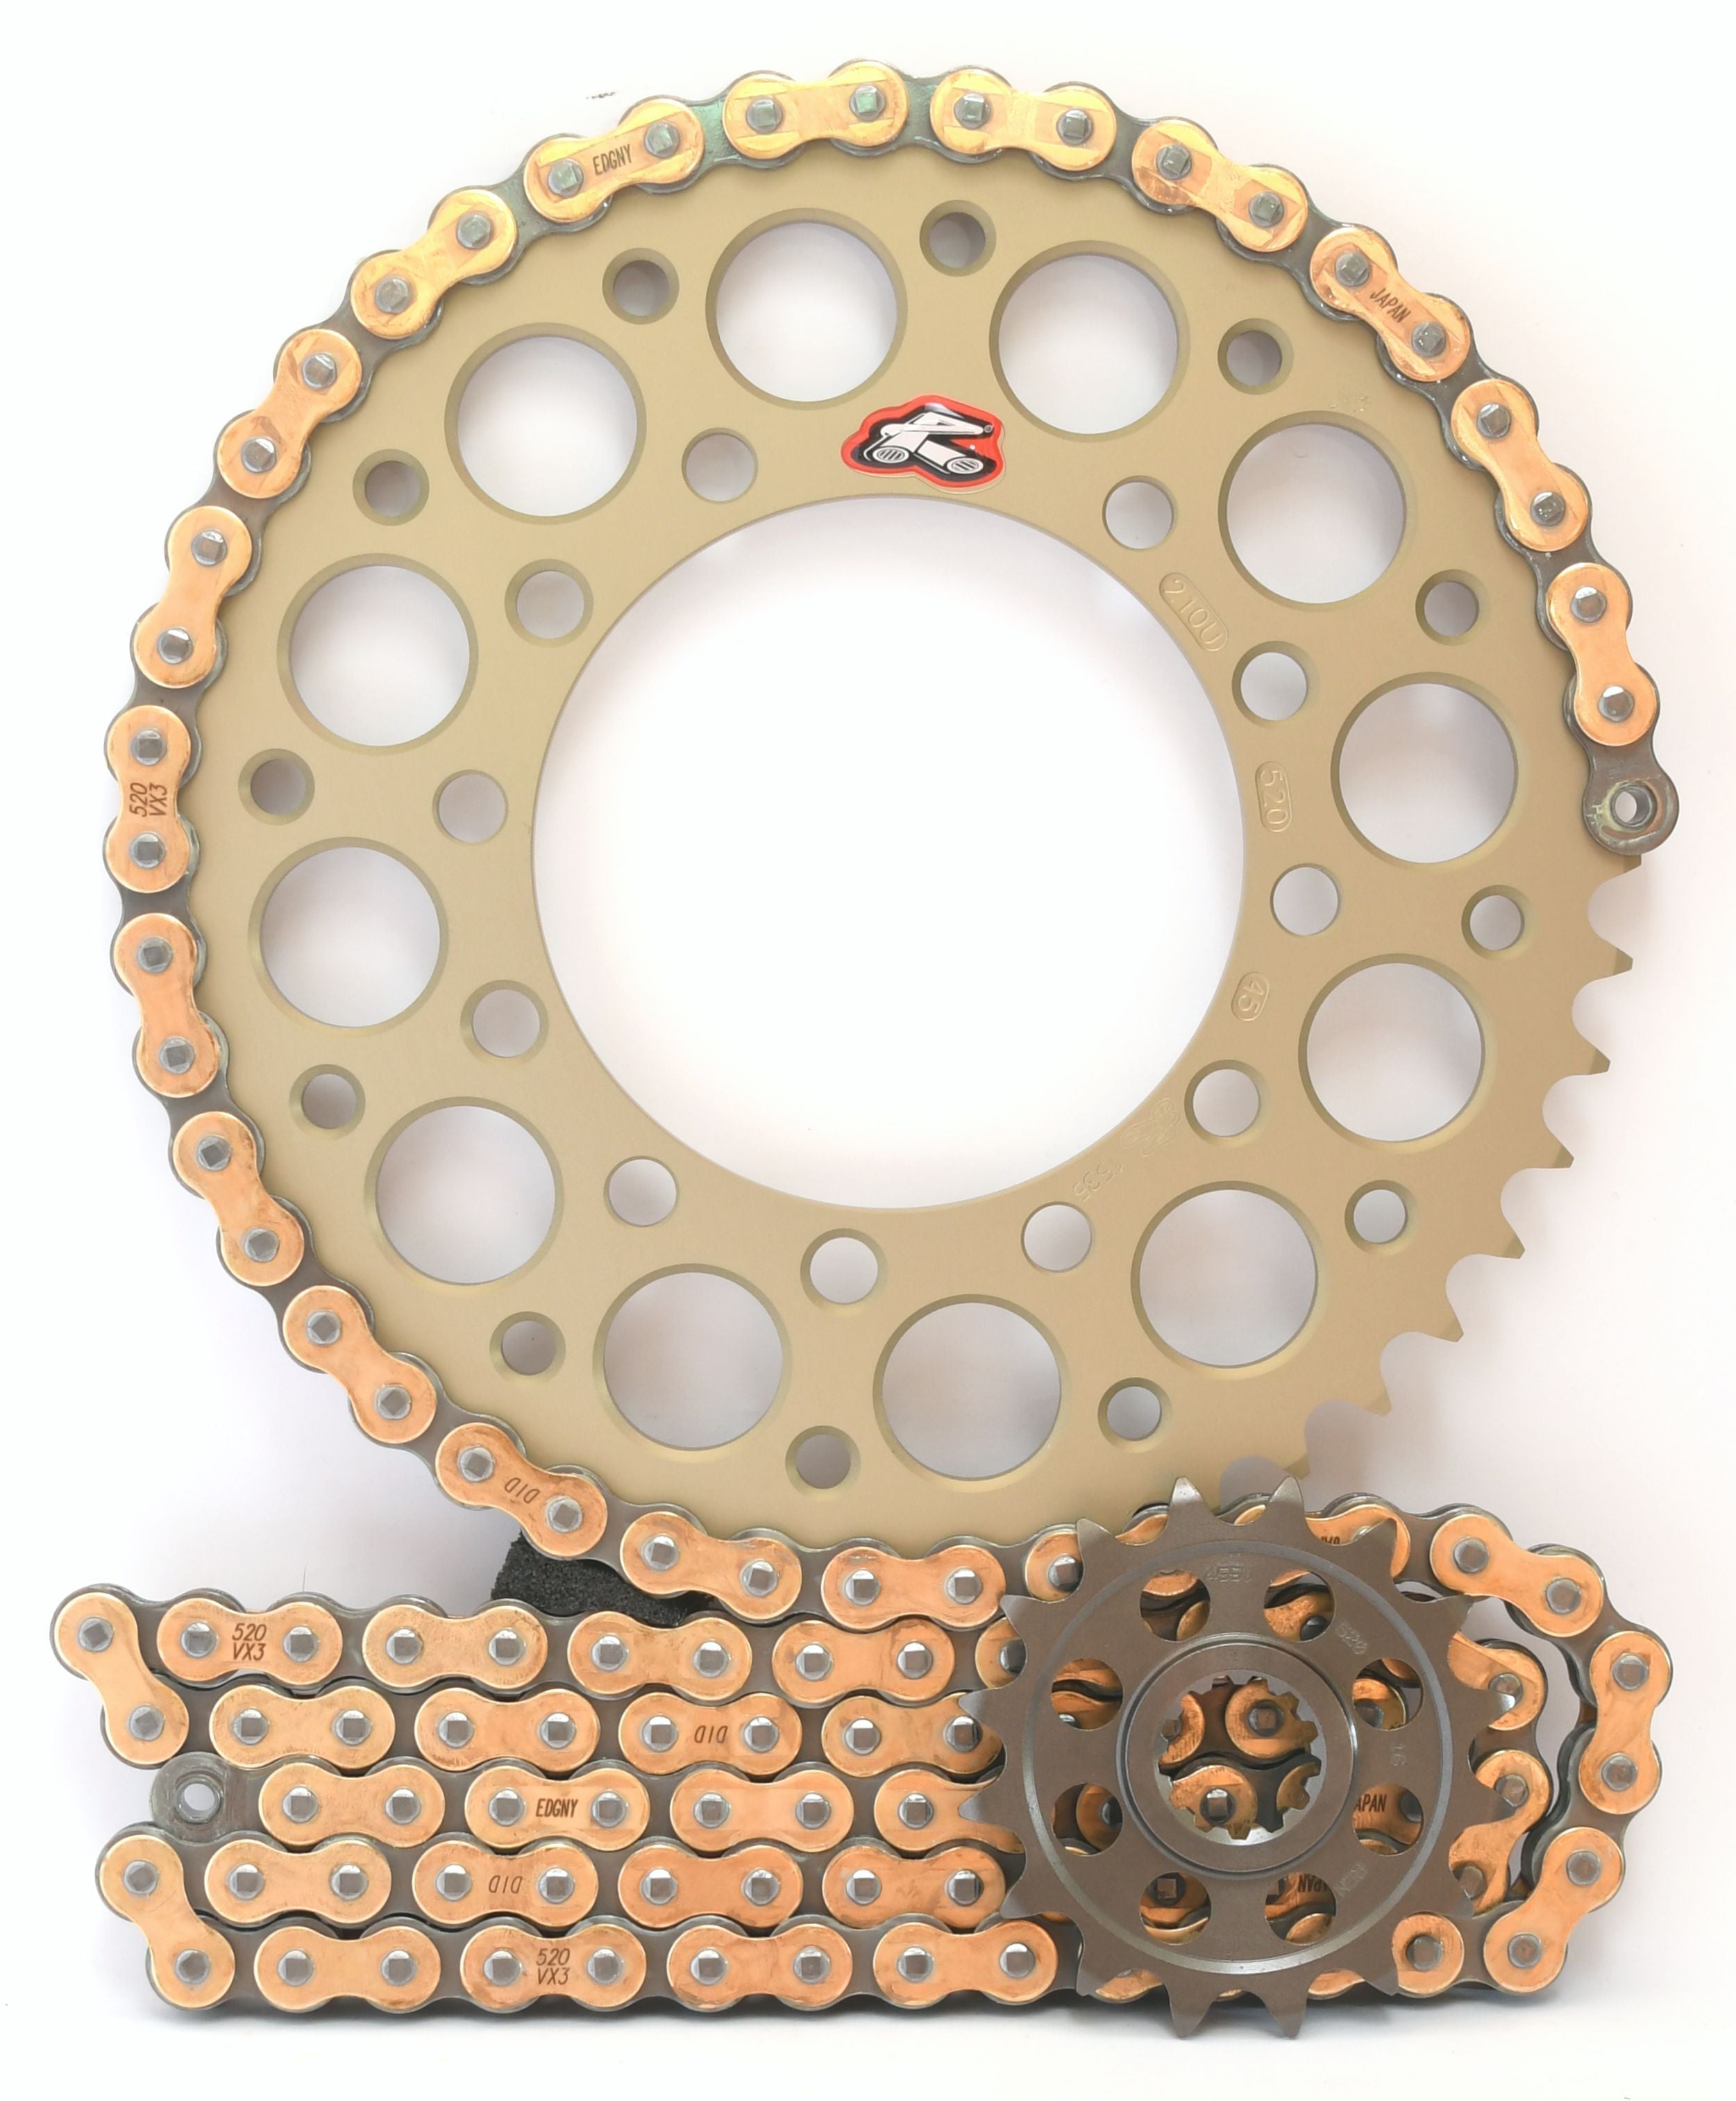 Renthal Ultralight and DID Chain & Sprocket Kit 520 Conversion for GSX-R600 2001-2003 - Standard Gearing